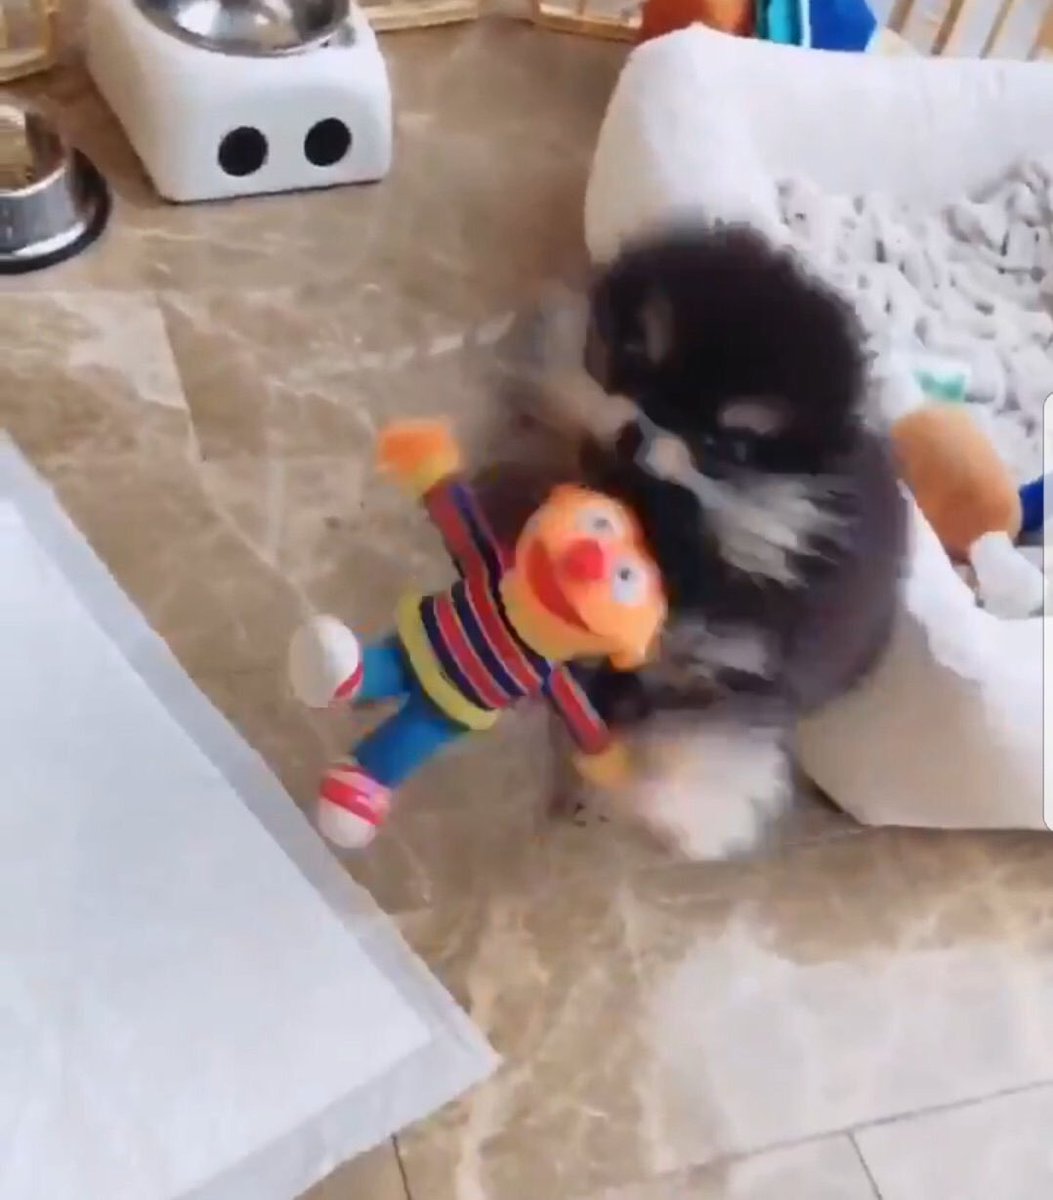 Tannie playing with one of jungkook's dolls 